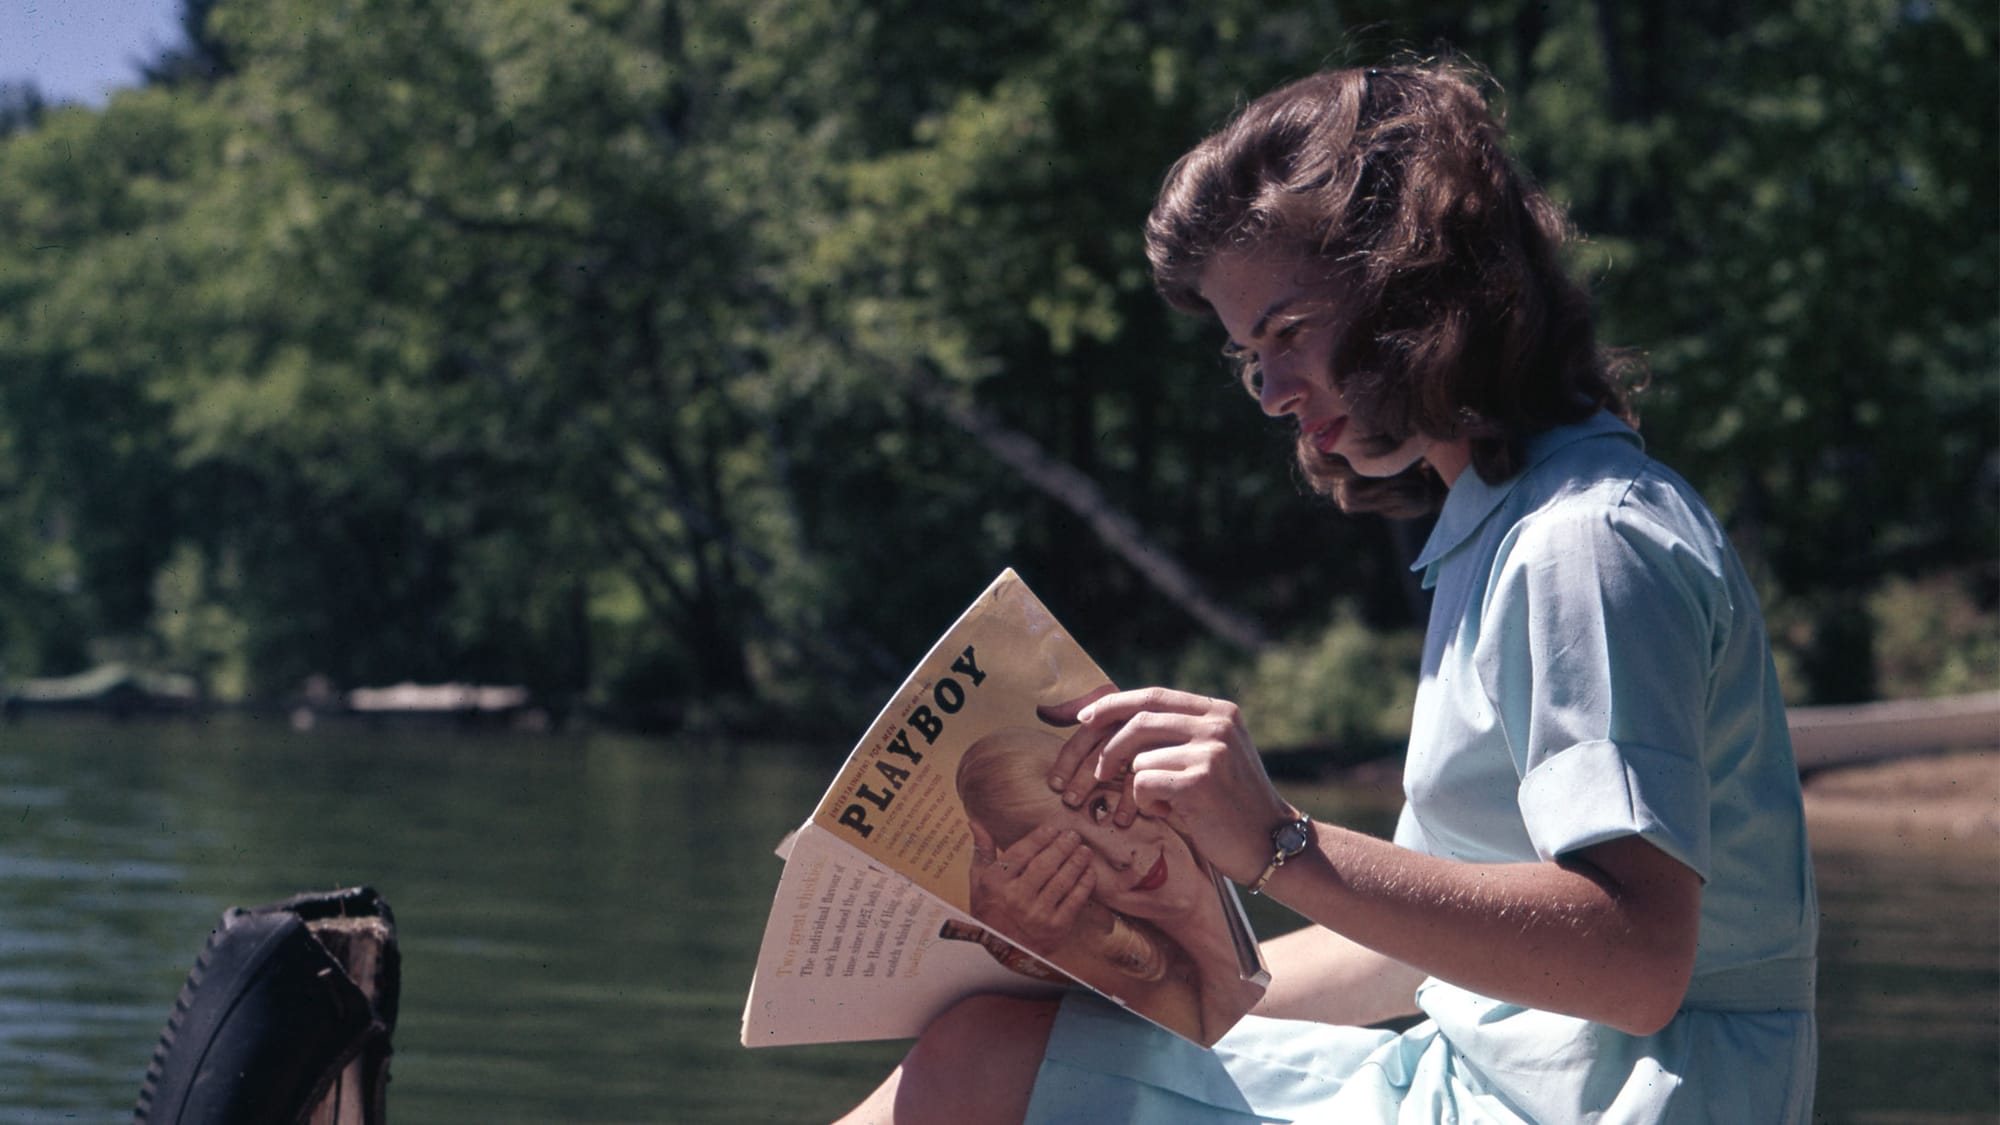 A young woman in 60s shirt and blouse of crisp pale blue cotton, seated lakeside on a wooden pier, reads Playboy Magazine